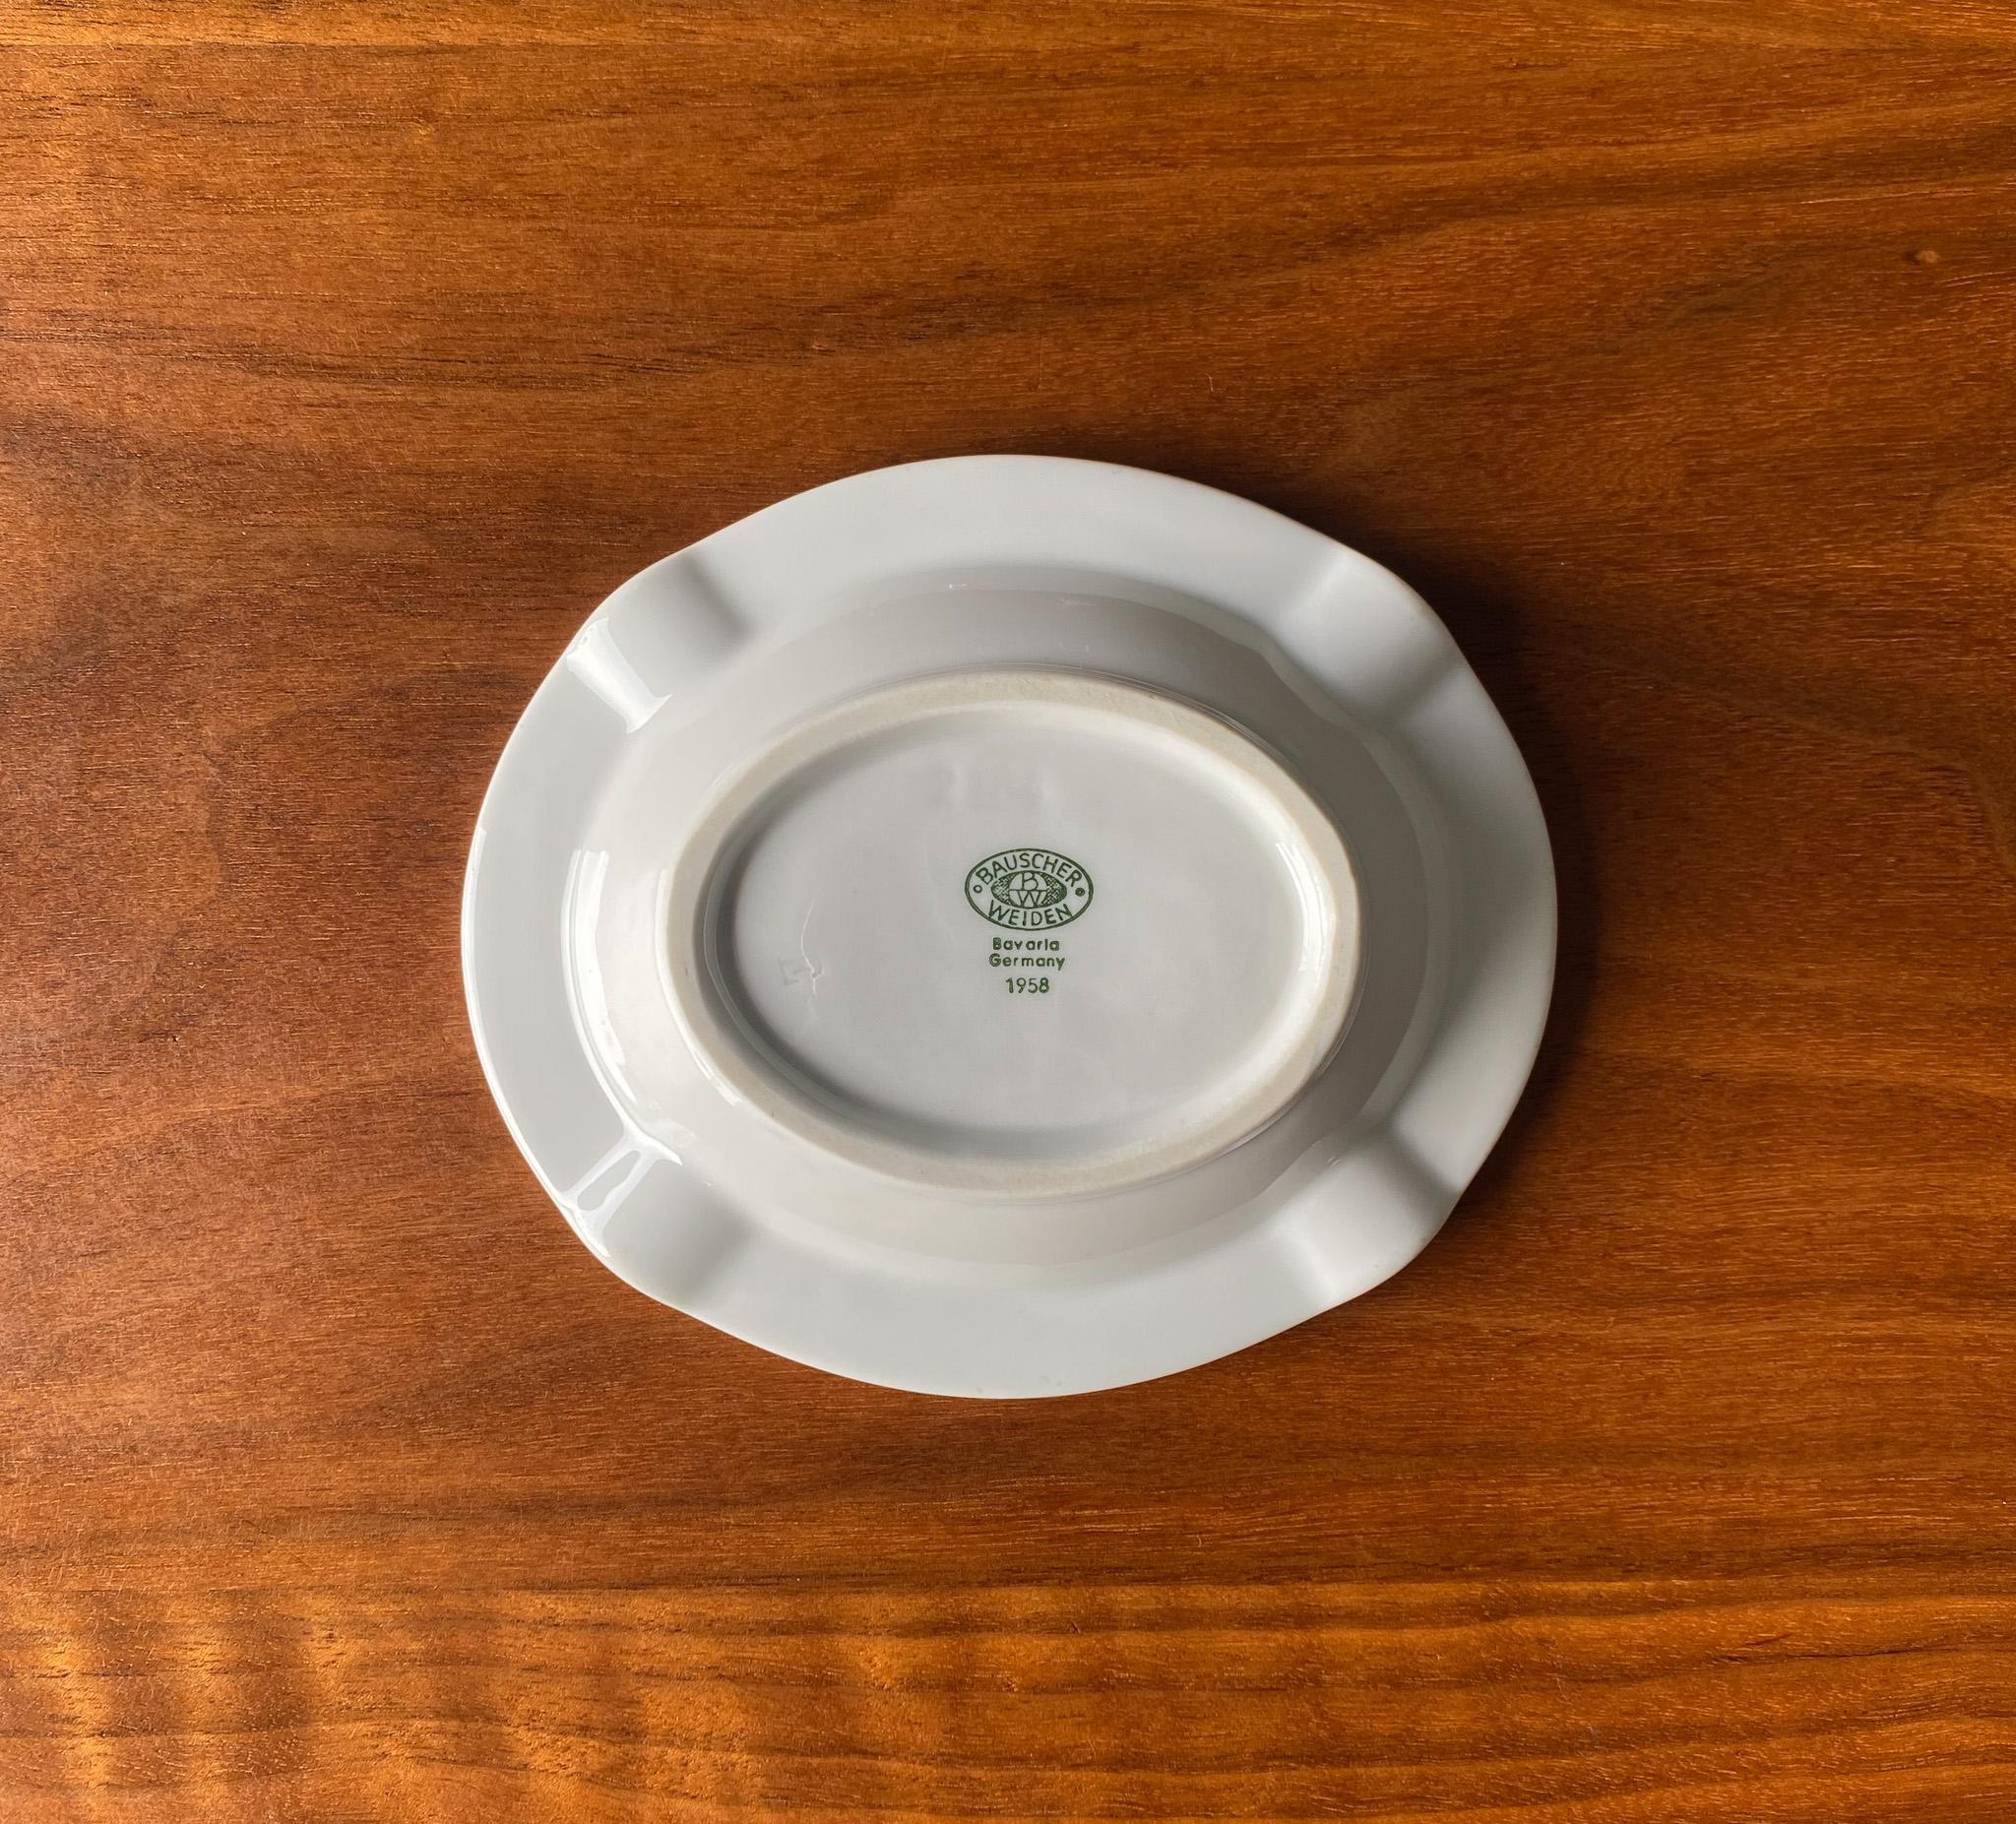 Mid Century Hotel Ambassadeurs Ceramic Ashtray by Bauscher Weiden, Germany, 1958 In Good Condition For Sale In Costa Mesa, CA